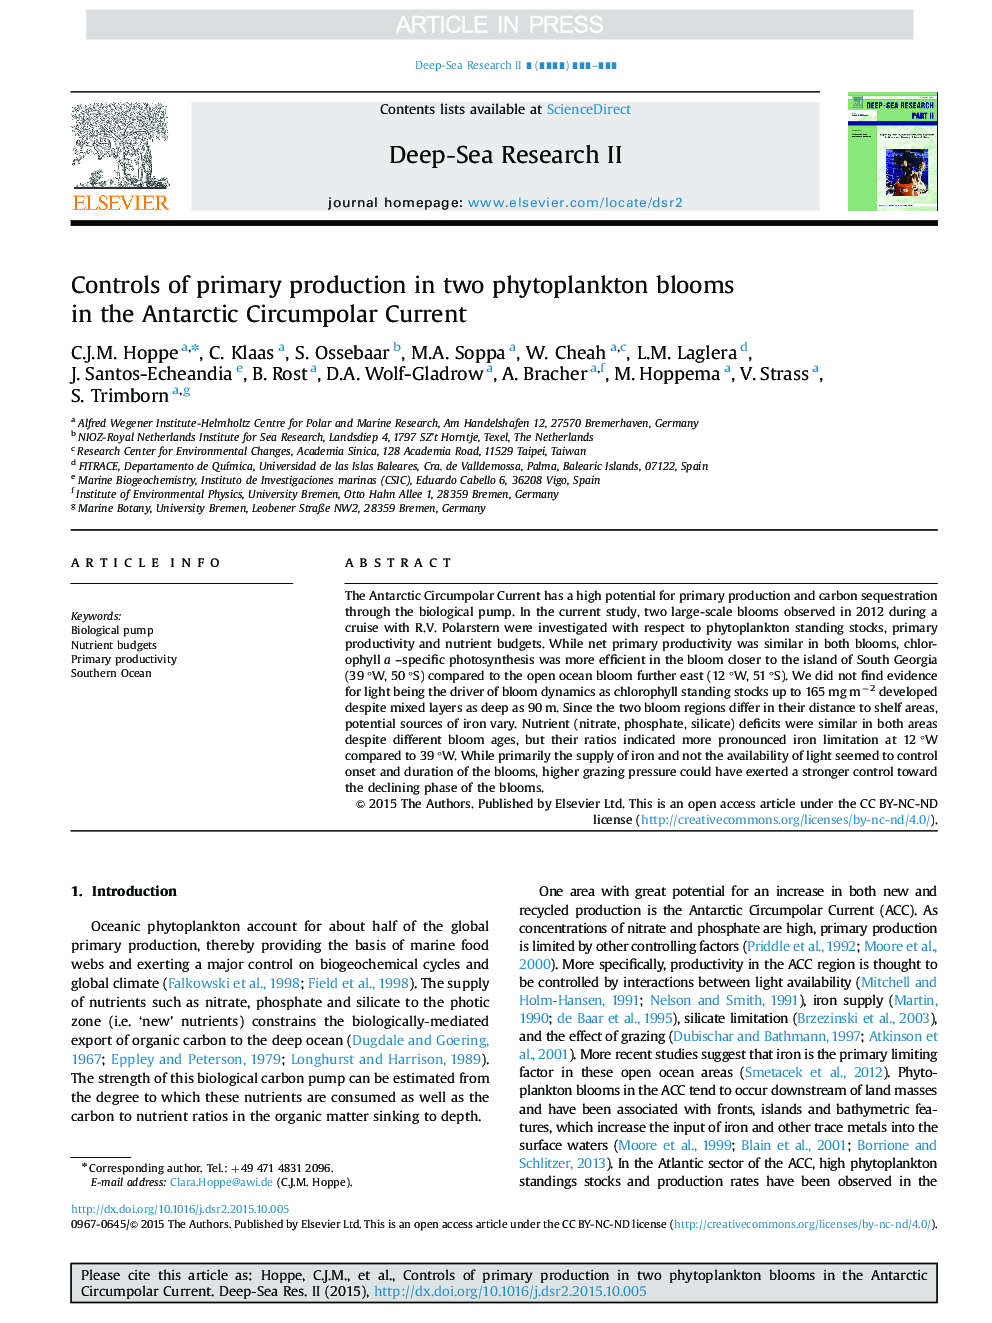 Controls of primary production in two phytoplankton blooms in the Antarctic Circumpolar Current